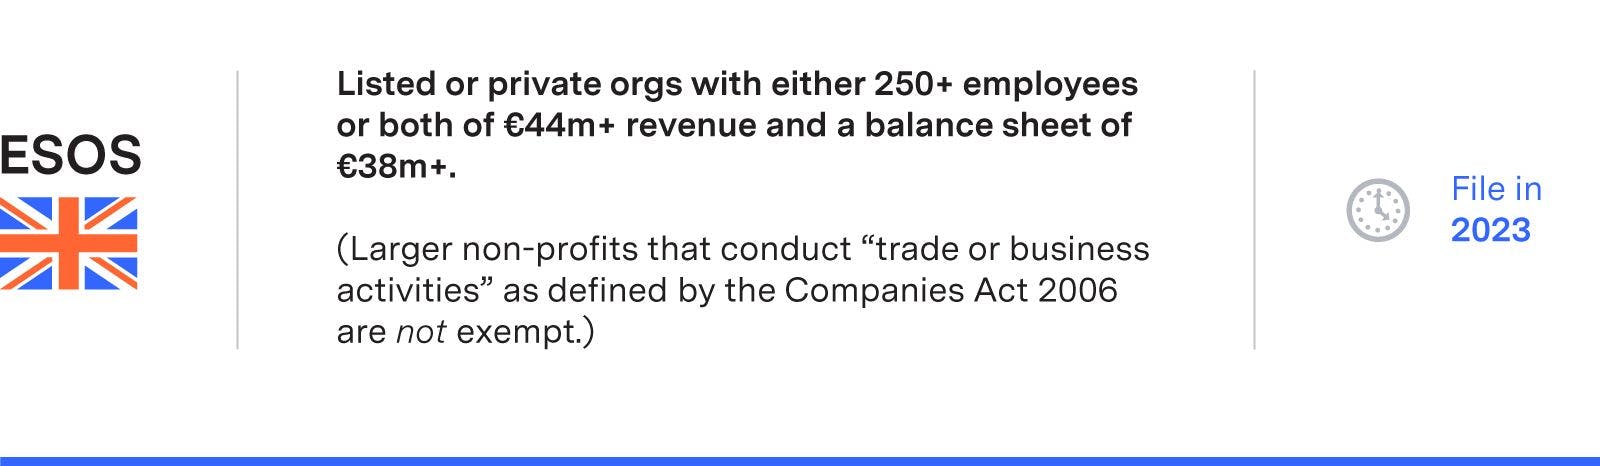 ESOS requirement: Listed or private orgs with either 250+ employees or both of €44m+ revenue and a balance sheet of €38m+. File in 2023.